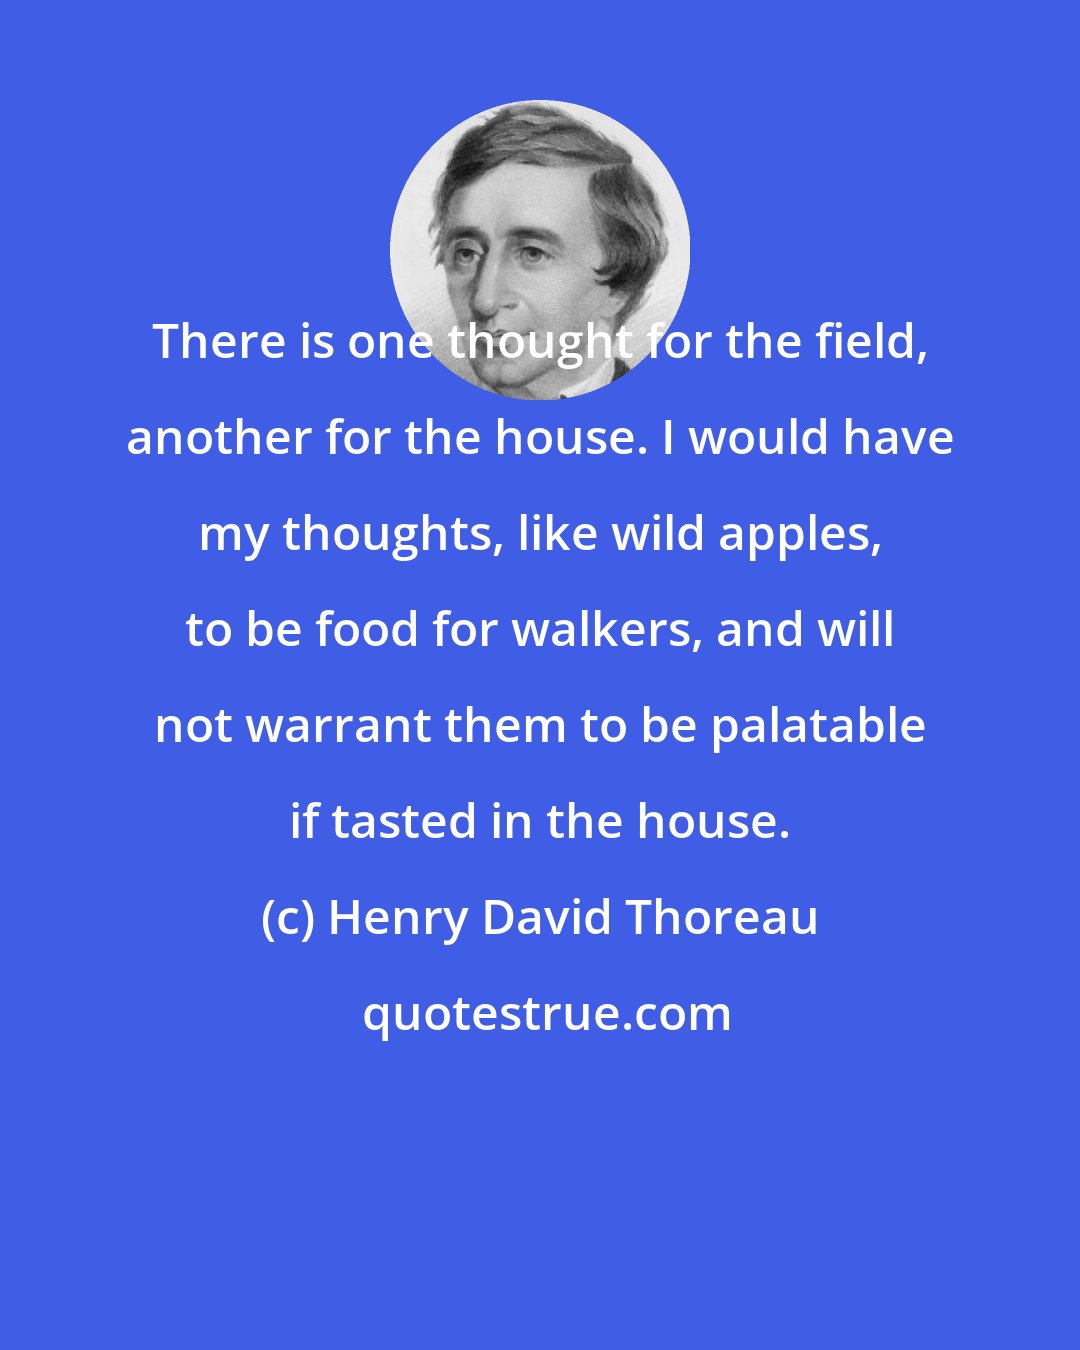 Henry David Thoreau: There is one thought for the field, another for the house. I would have my thoughts, like wild apples, to be food for walkers, and will not warrant them to be palatable if tasted in the house.